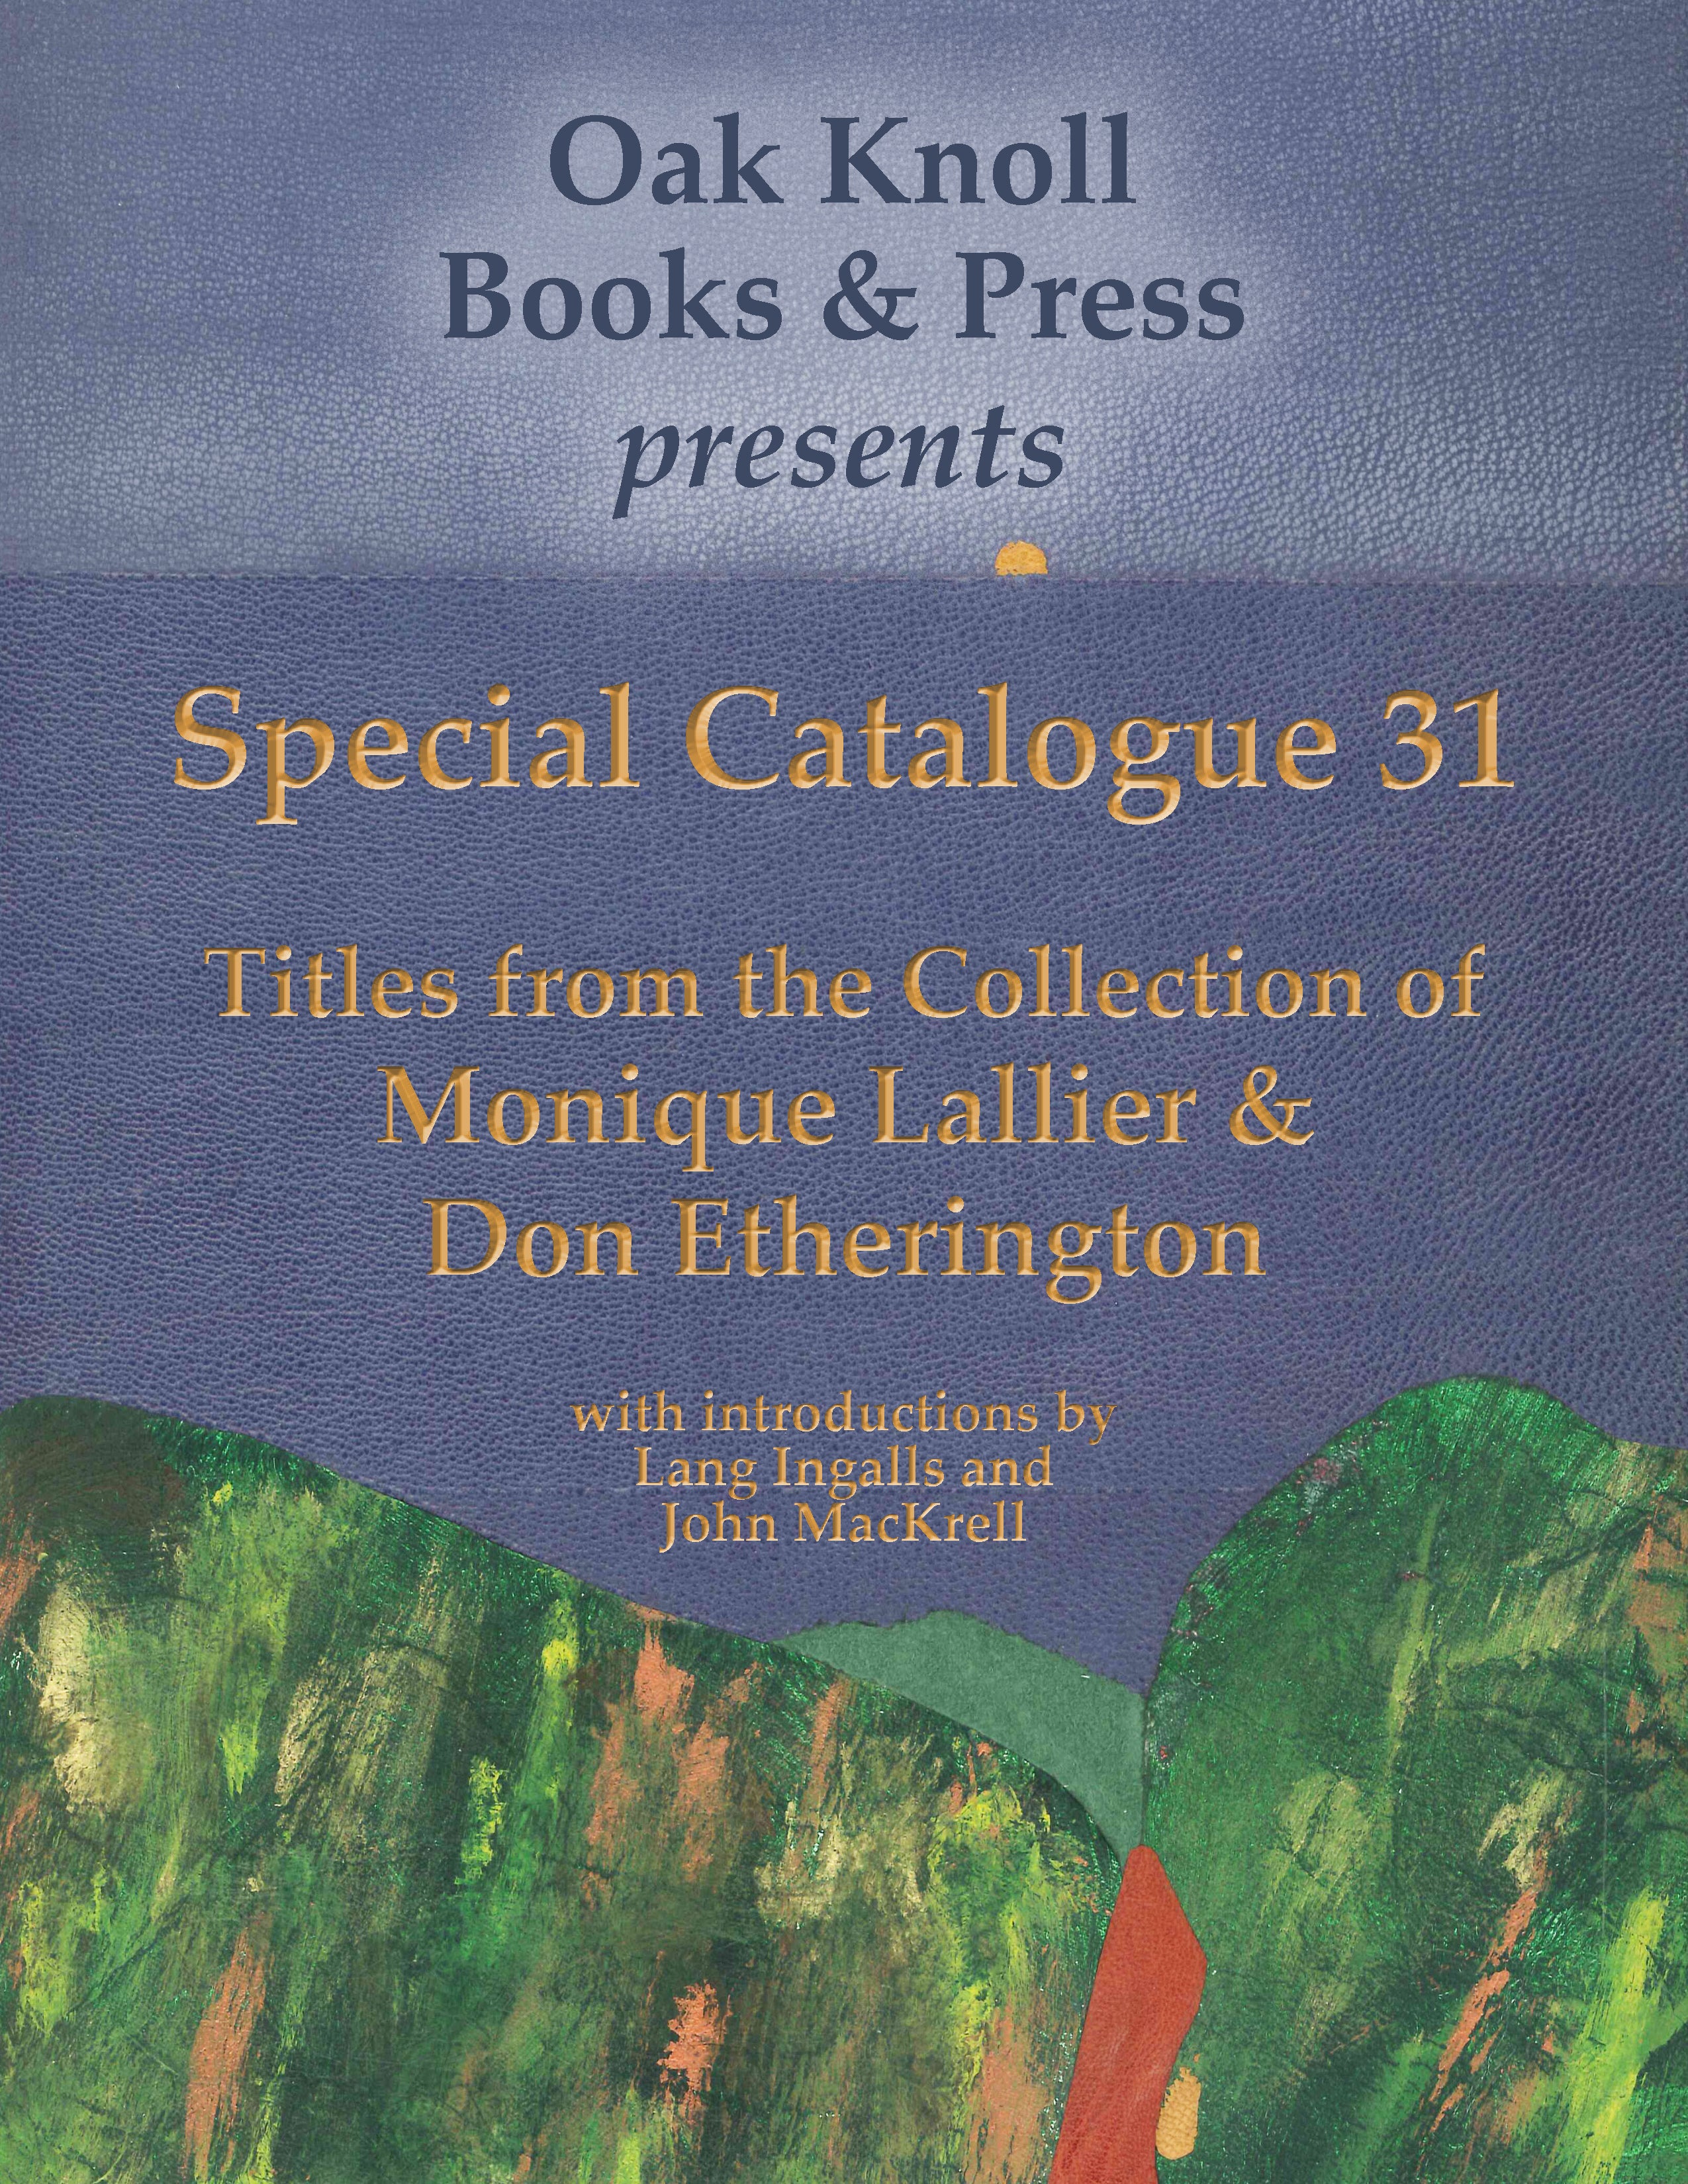 Special Catalogue #31: Titles from the Collection of Monique Lallier & Don Etherington